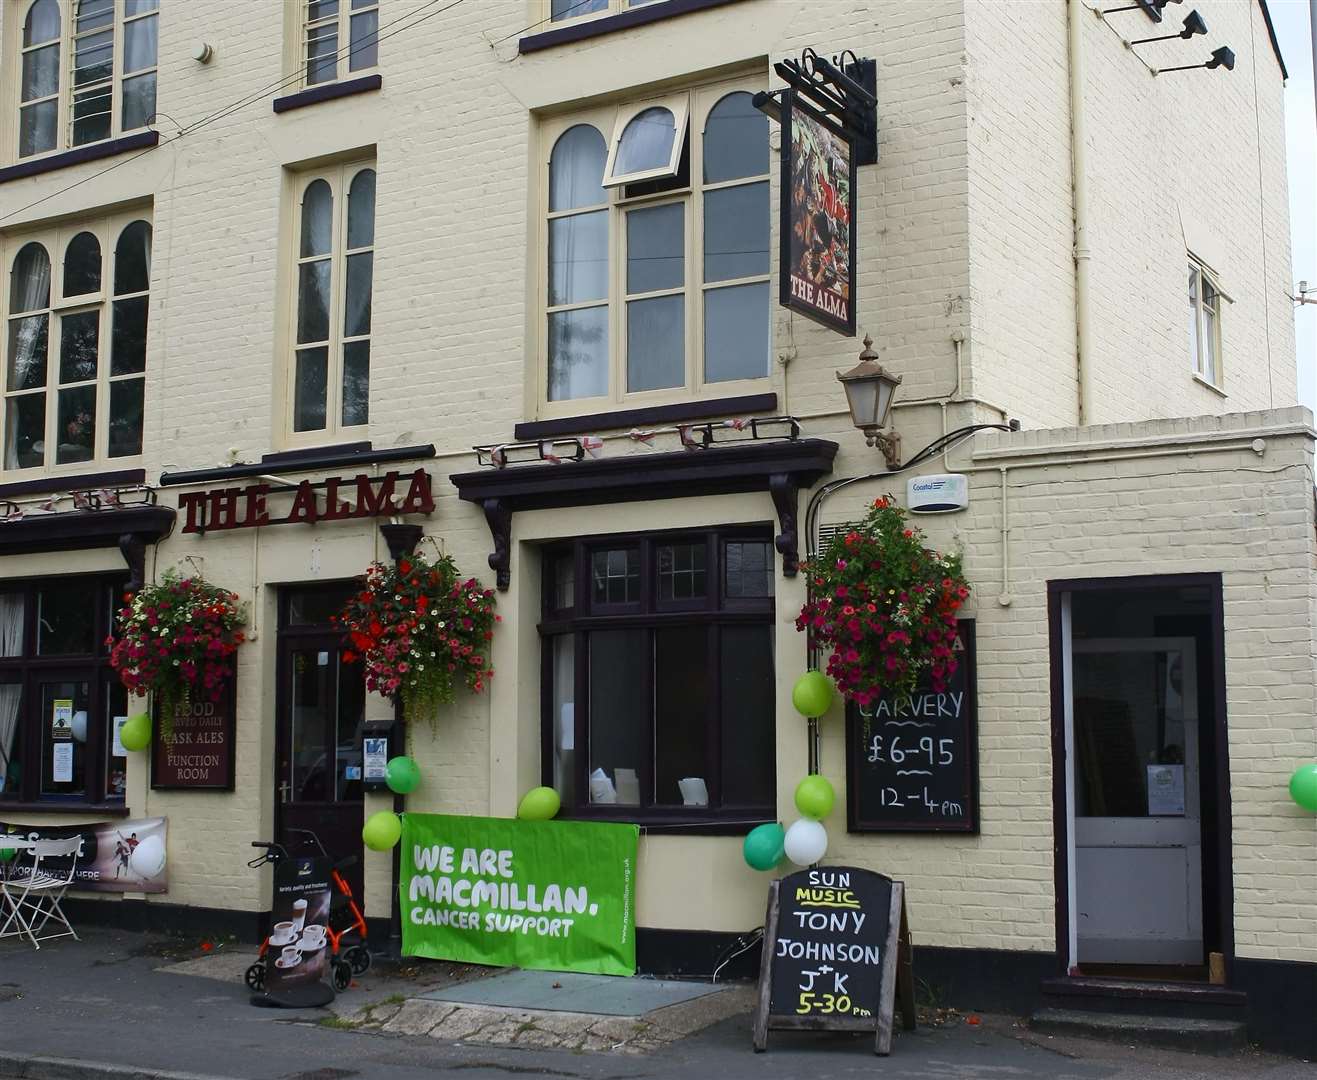 The Macmillan event will be at The Alma pub in Deal